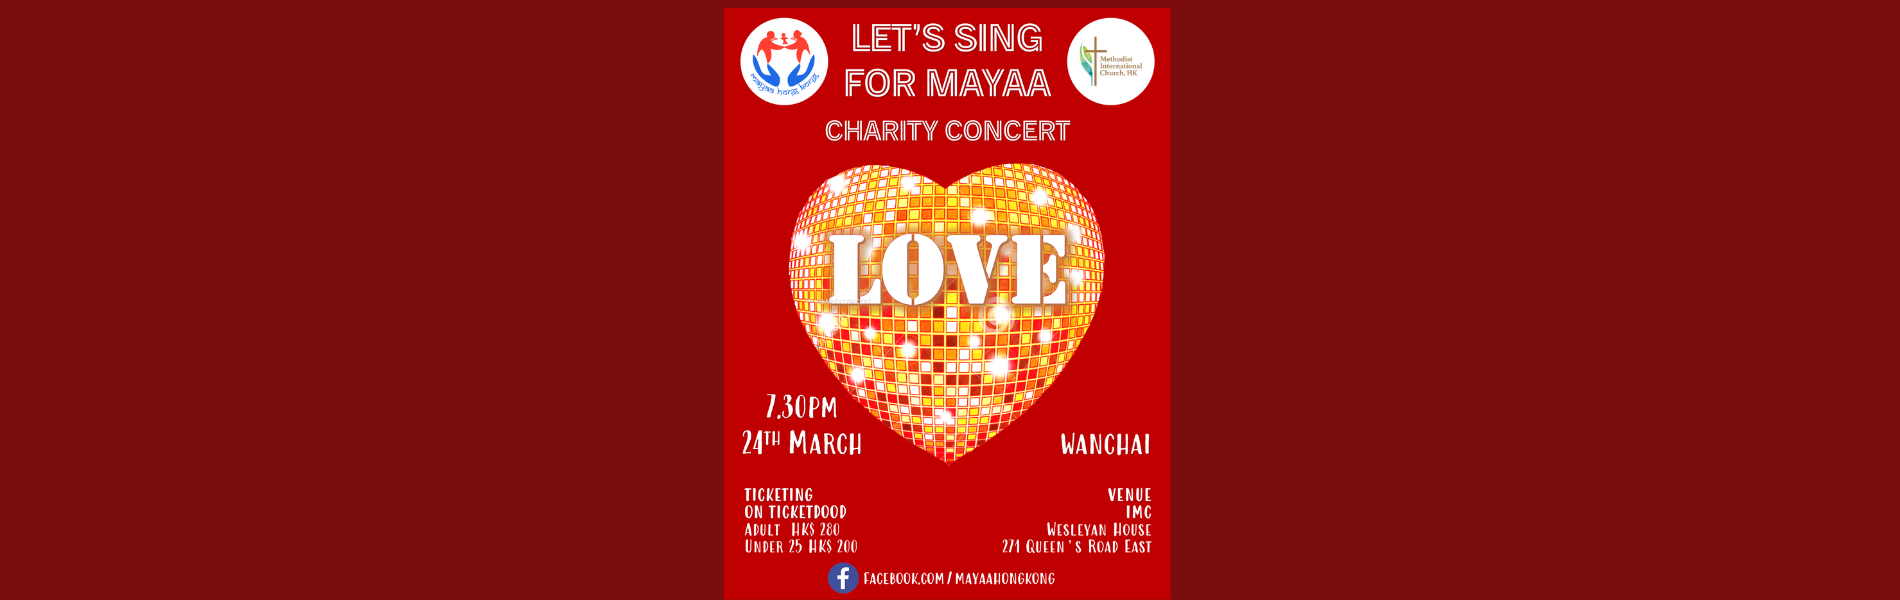 Let's Sing for Mayaa - 7th Charity Concert